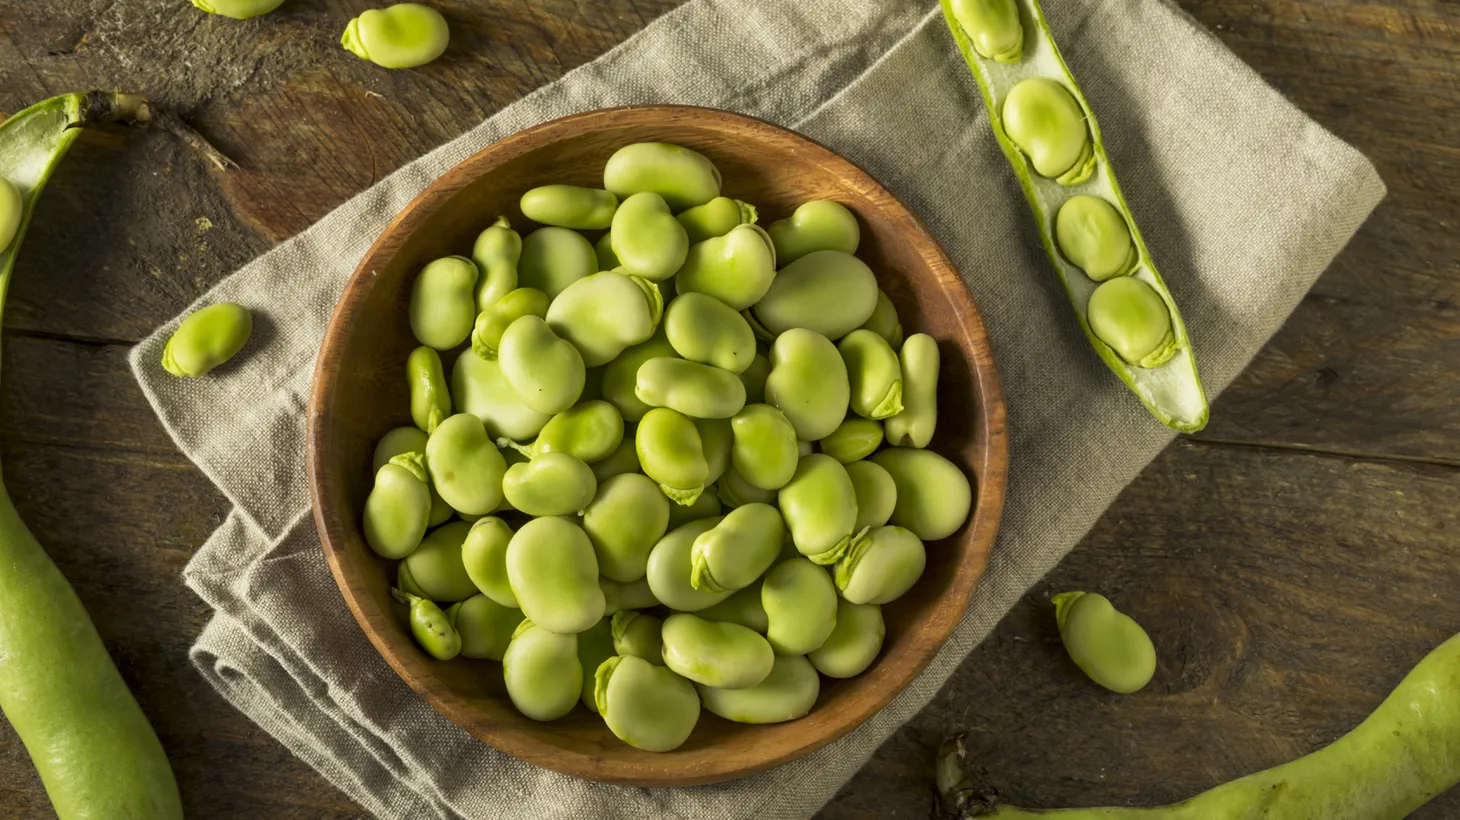 Fresh green fava beans are a nutritious and versatile ingredient.